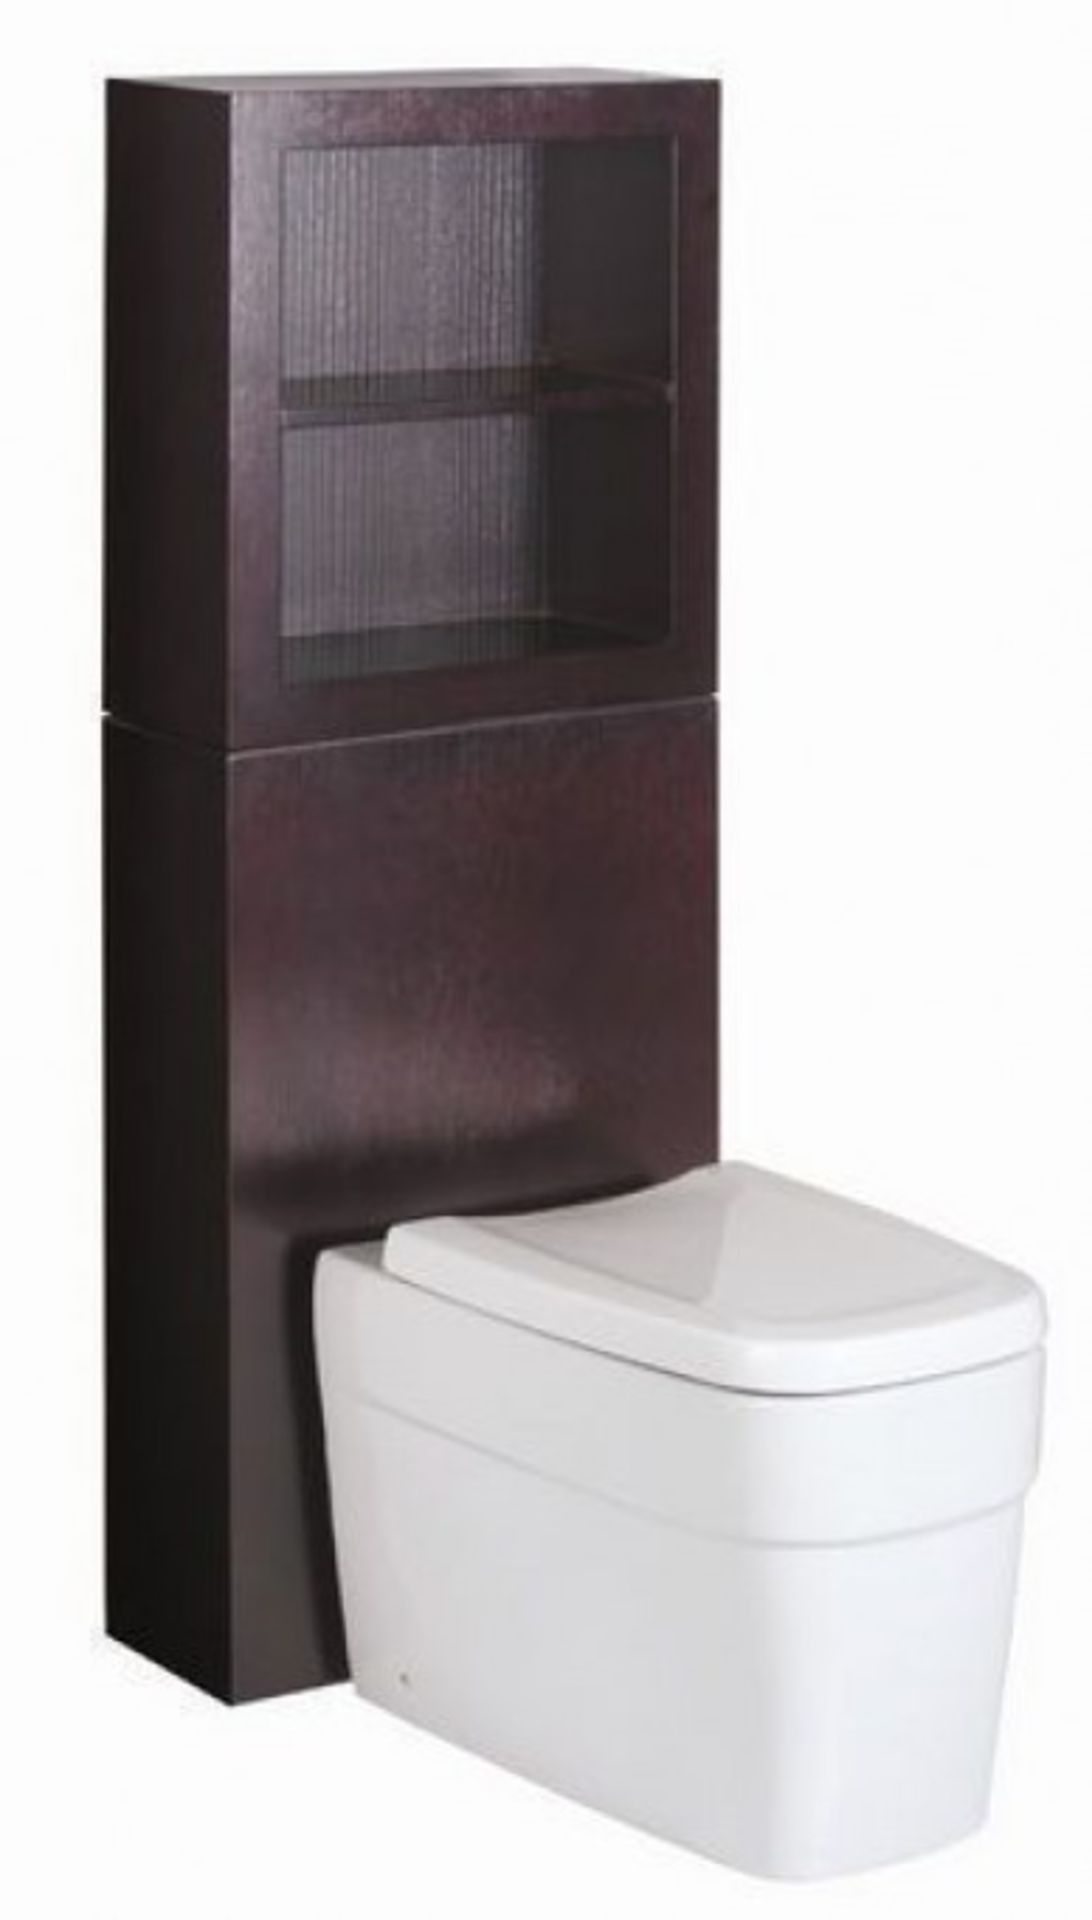 1 x Vogue ARC Series 2 Back to Wall TOILET PAN CISTERN UNIT With Additional Top Shelf Unit - WENGE